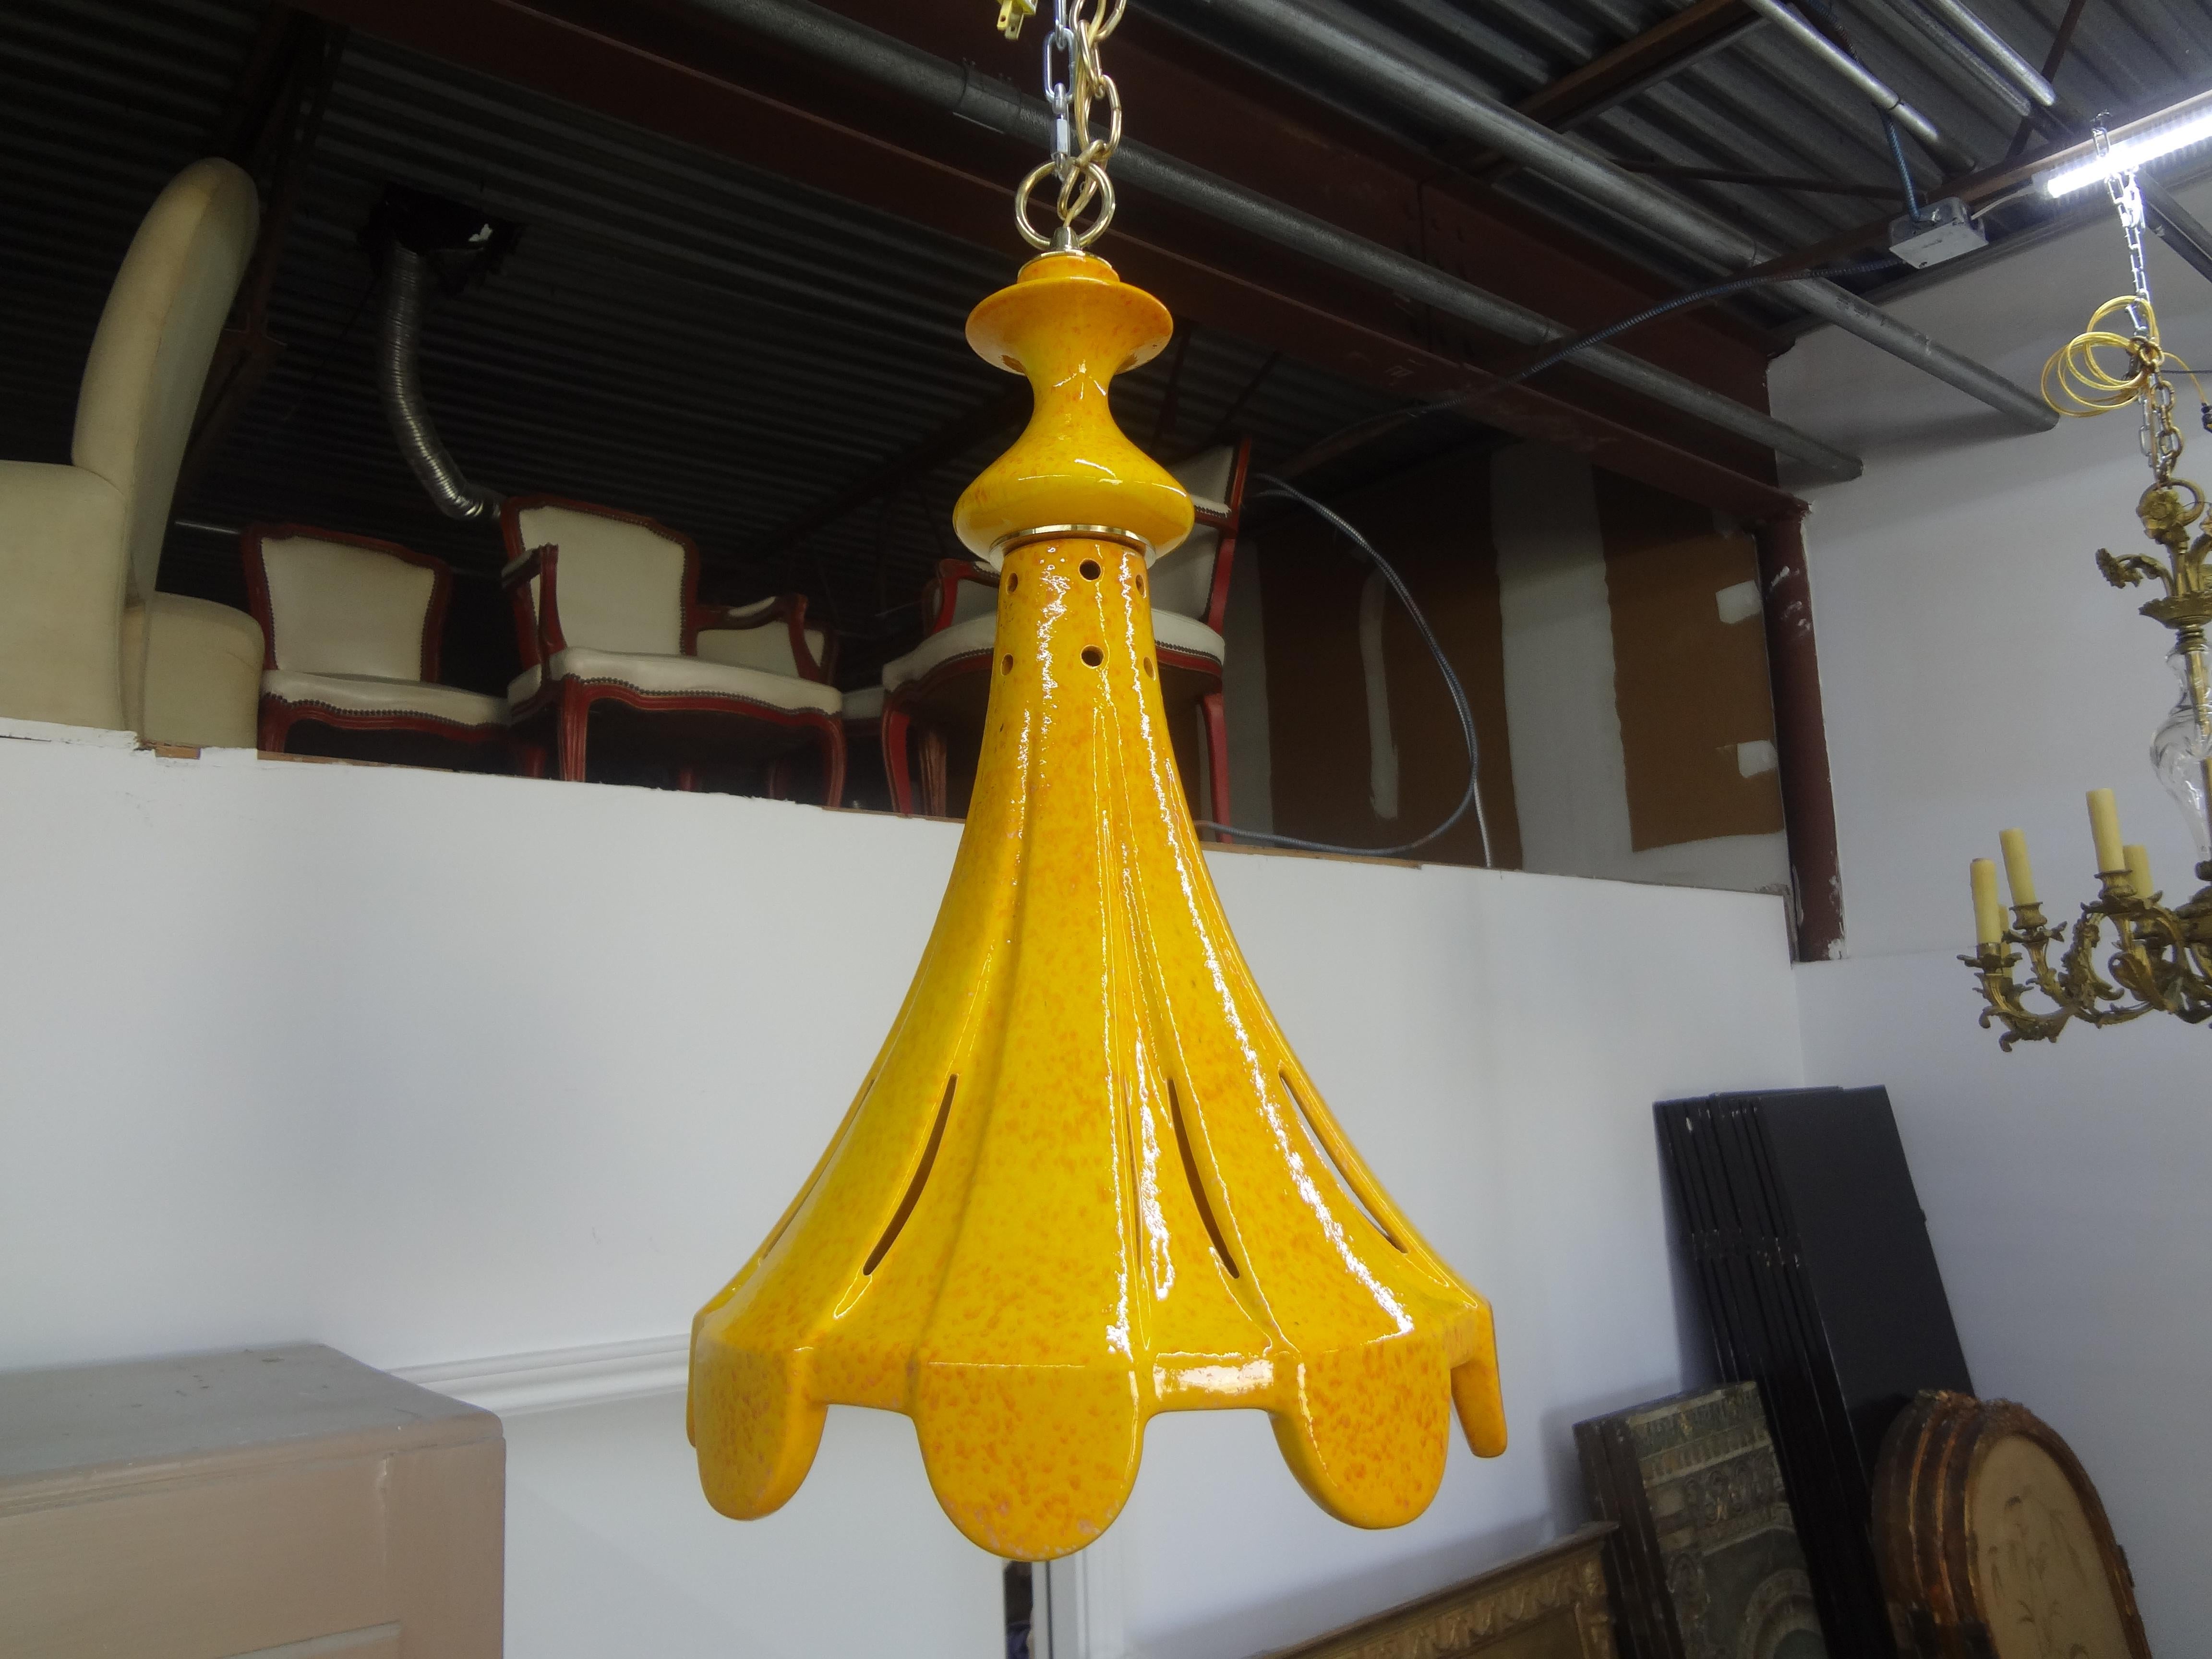 Pair of Italian glazed ceramic pendants or lanterns. This stunning pair of Italian ceramic pendants have perforated detail that emits beautiful light. These lanterns have been professionally wired with new American sockets and 36